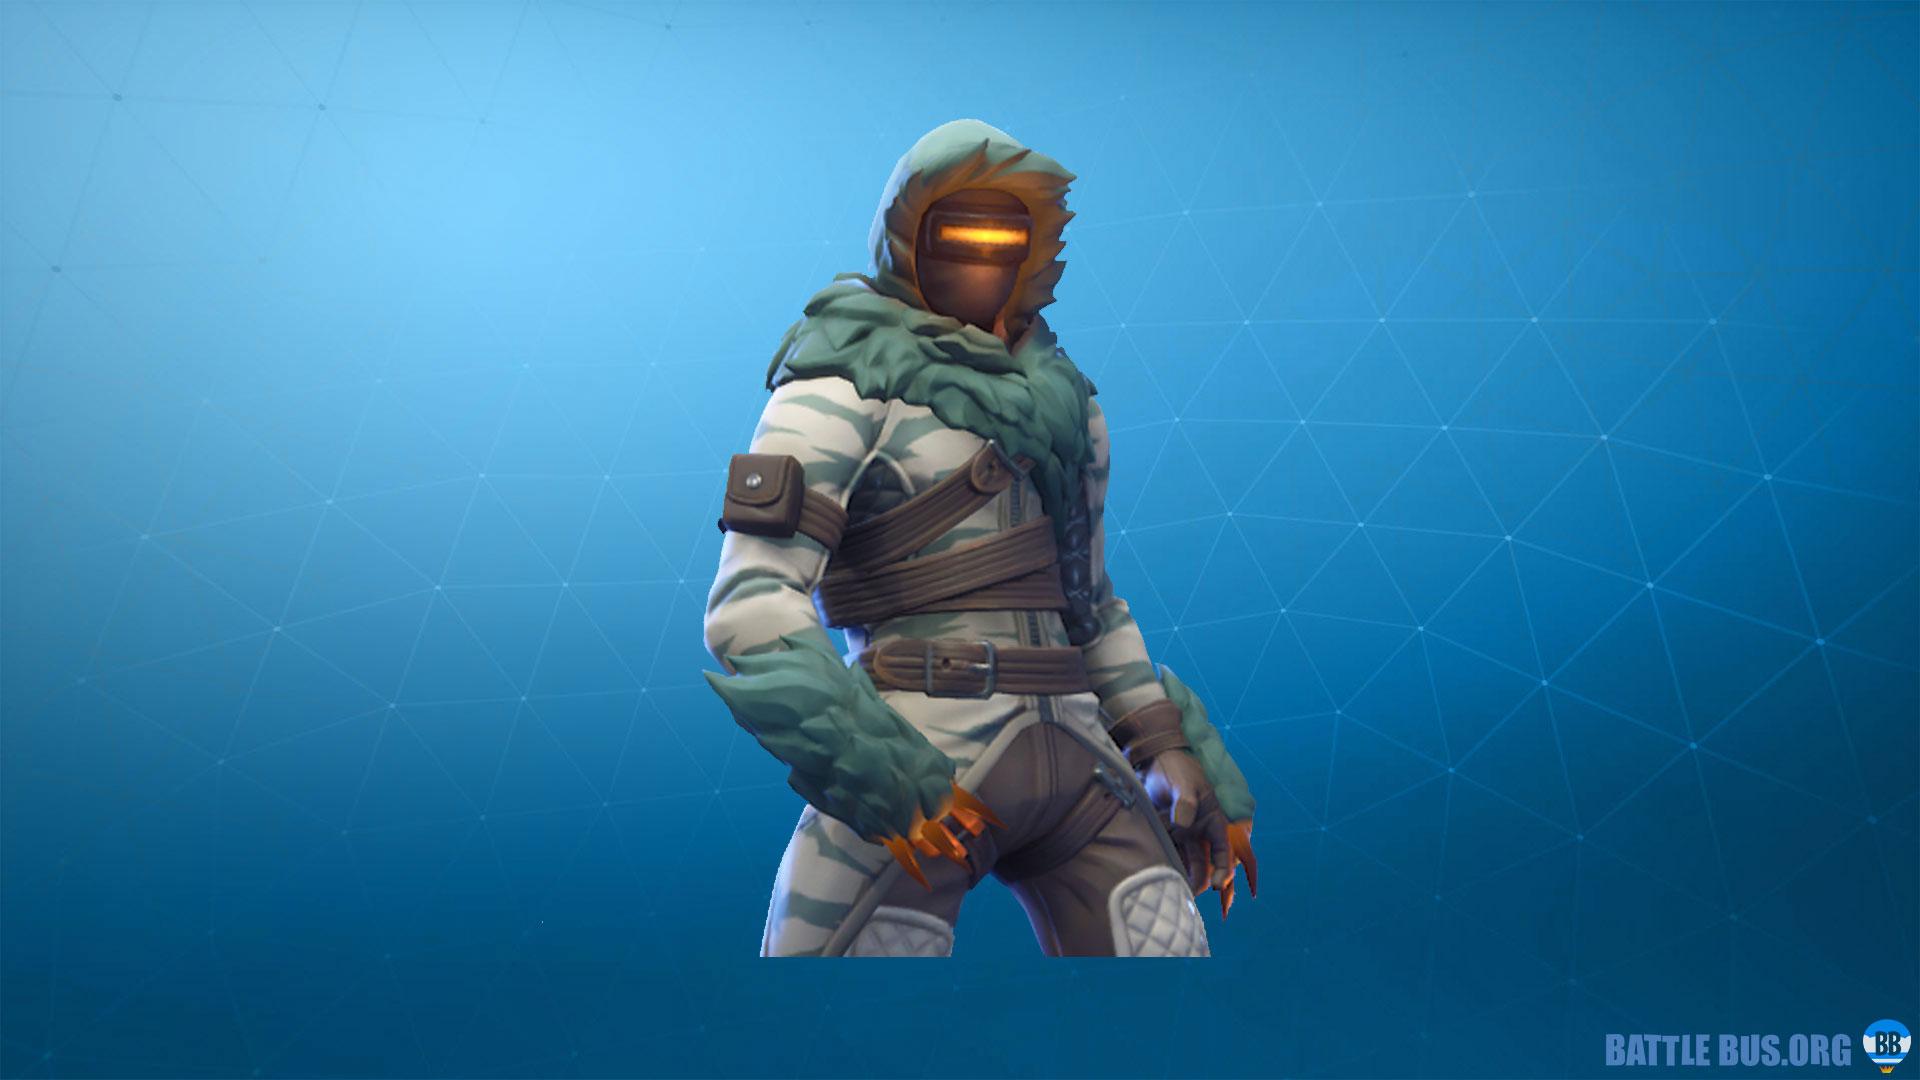 Zenith Fortnite outfit progressive skin, HD image and stats